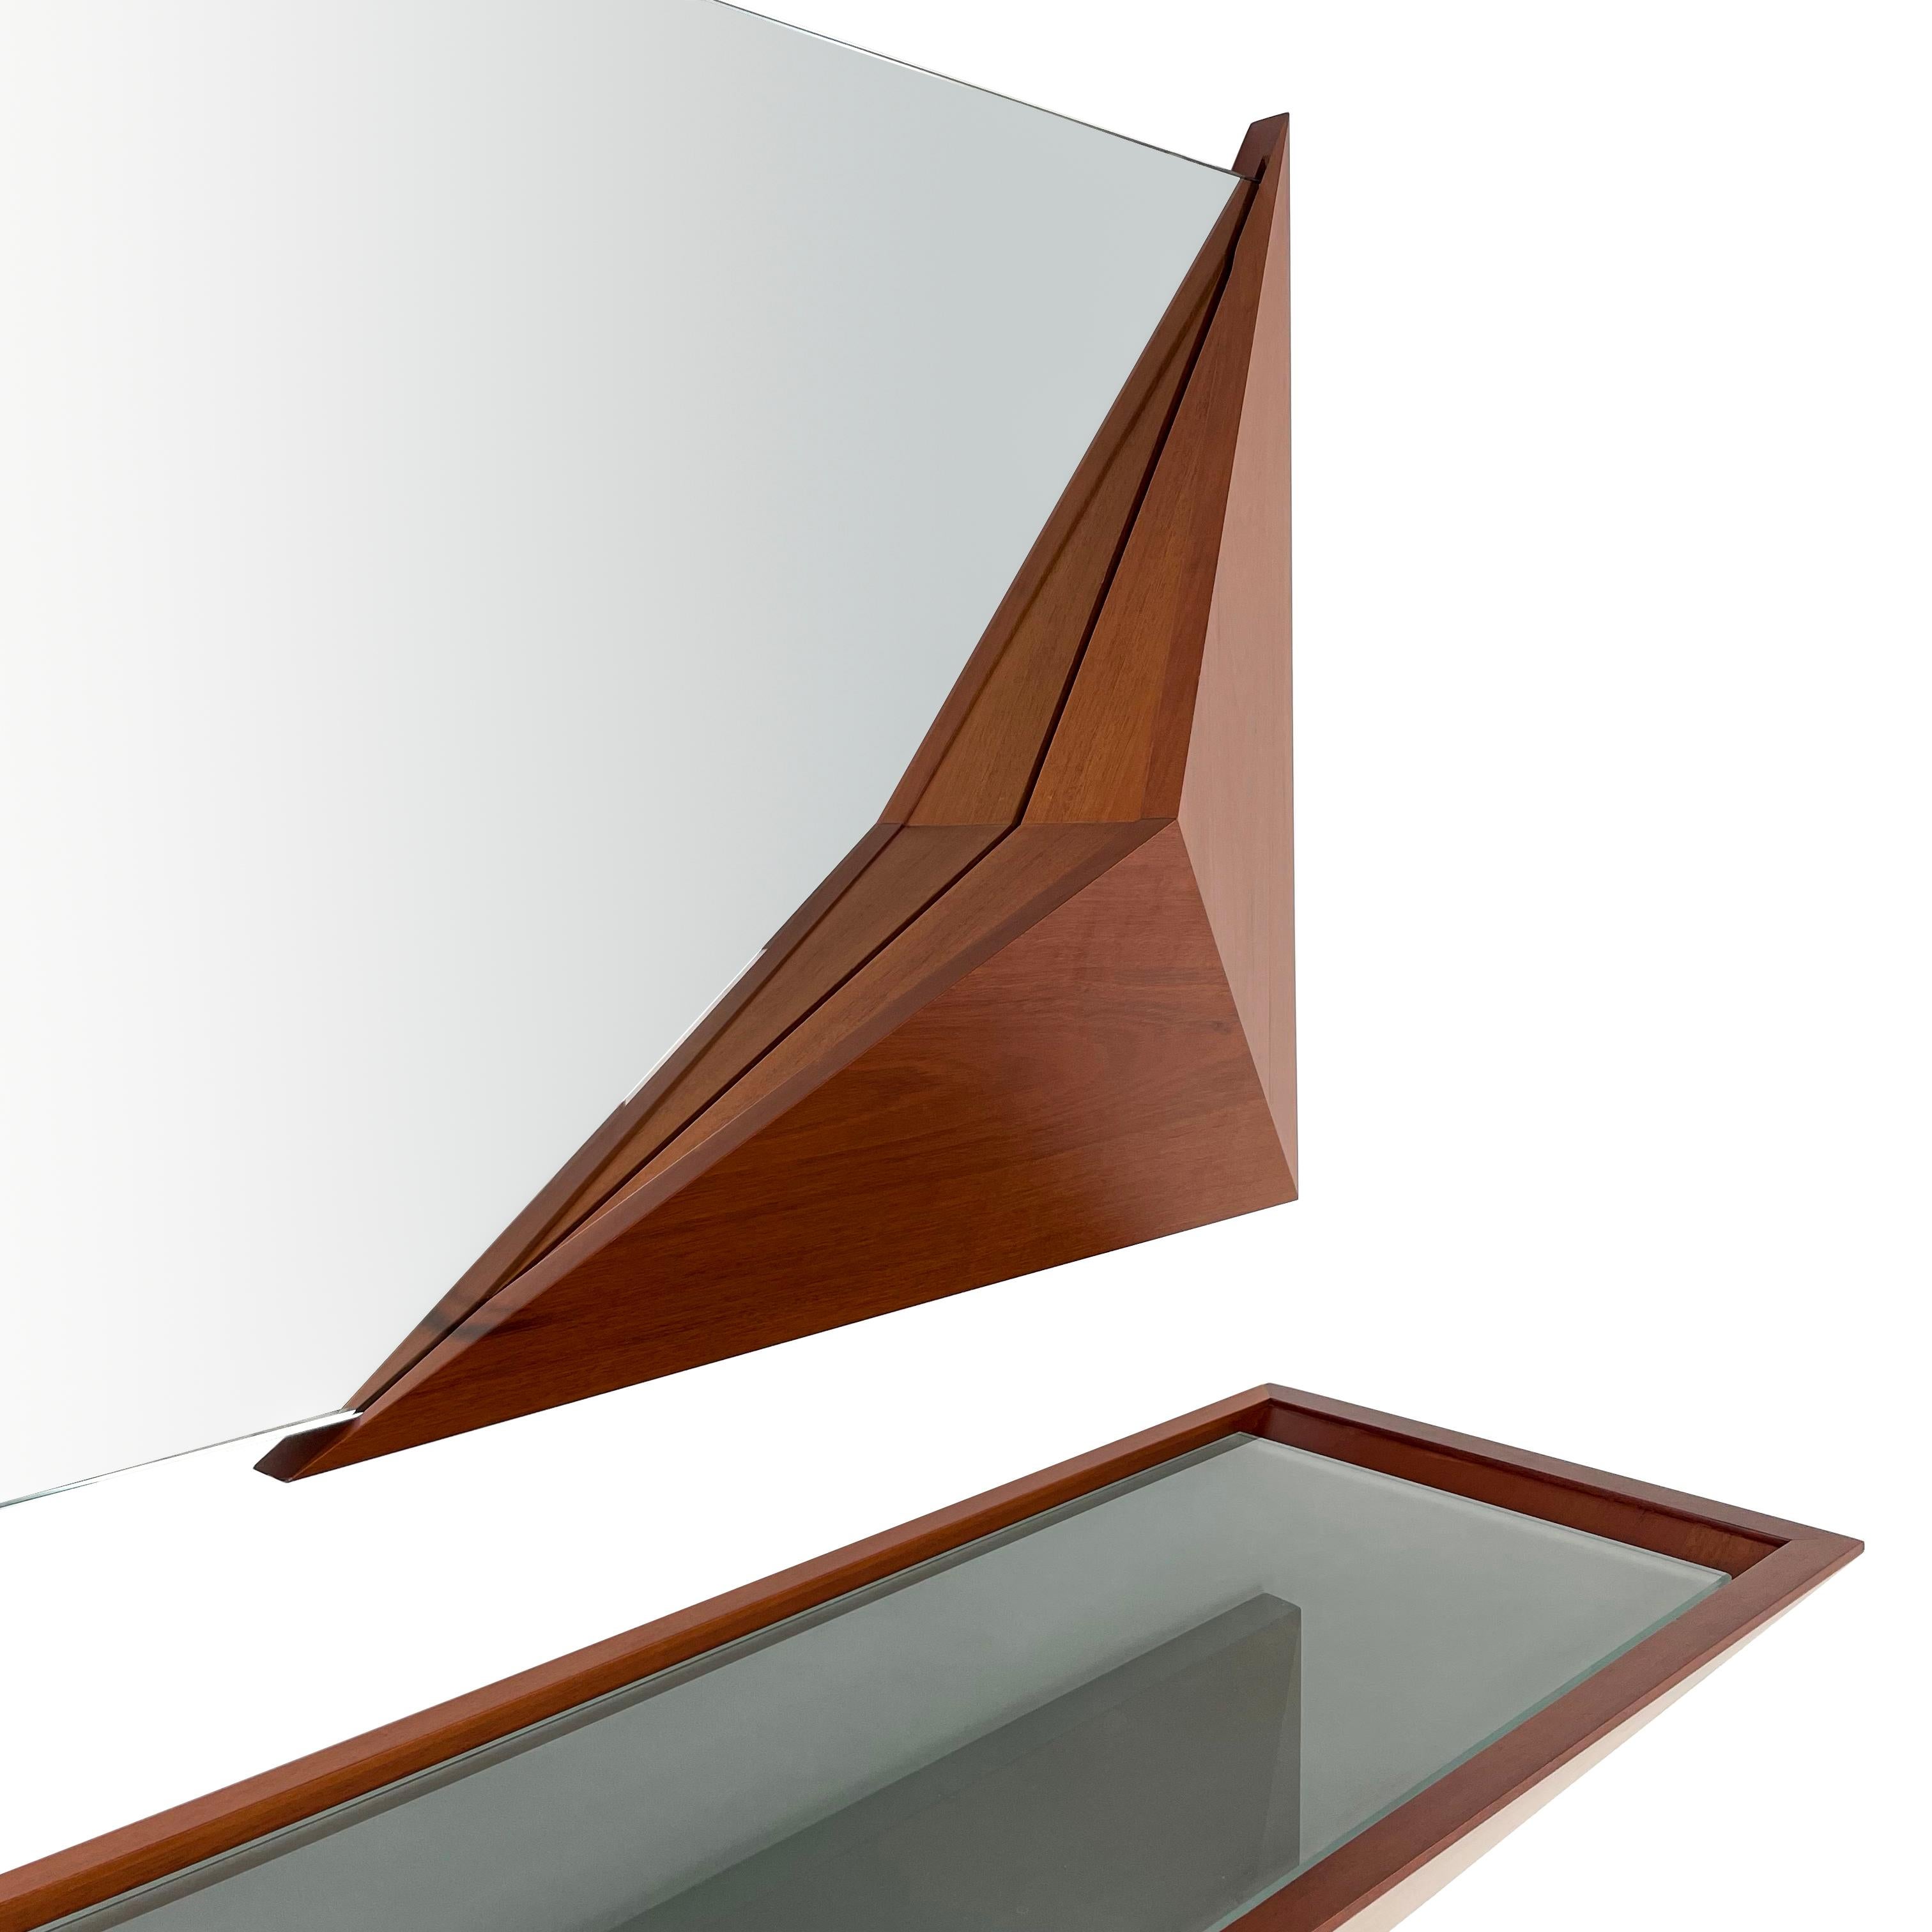 Guatemalan Modern Solid Wood and Glass Entry Mirror Console by Pierre Sarkis